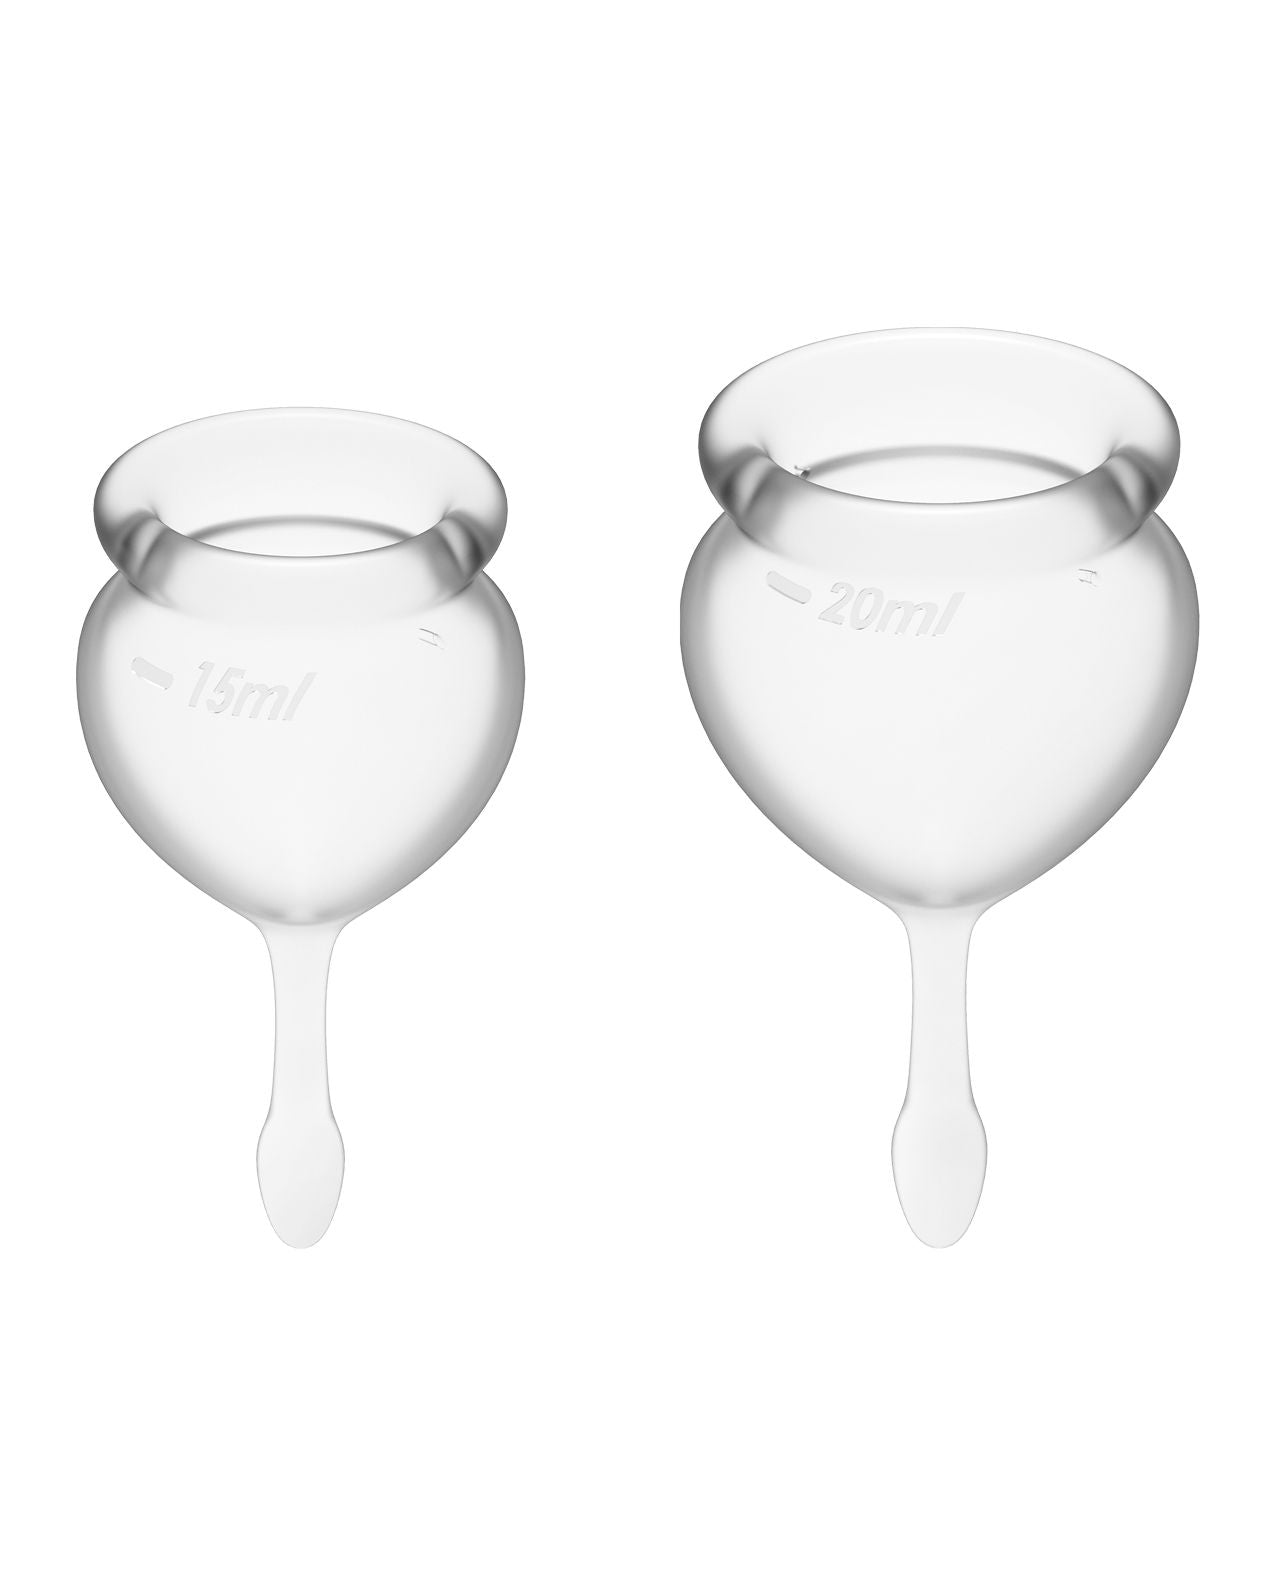 Front view of the 2 different sizes of diva cups (clear).